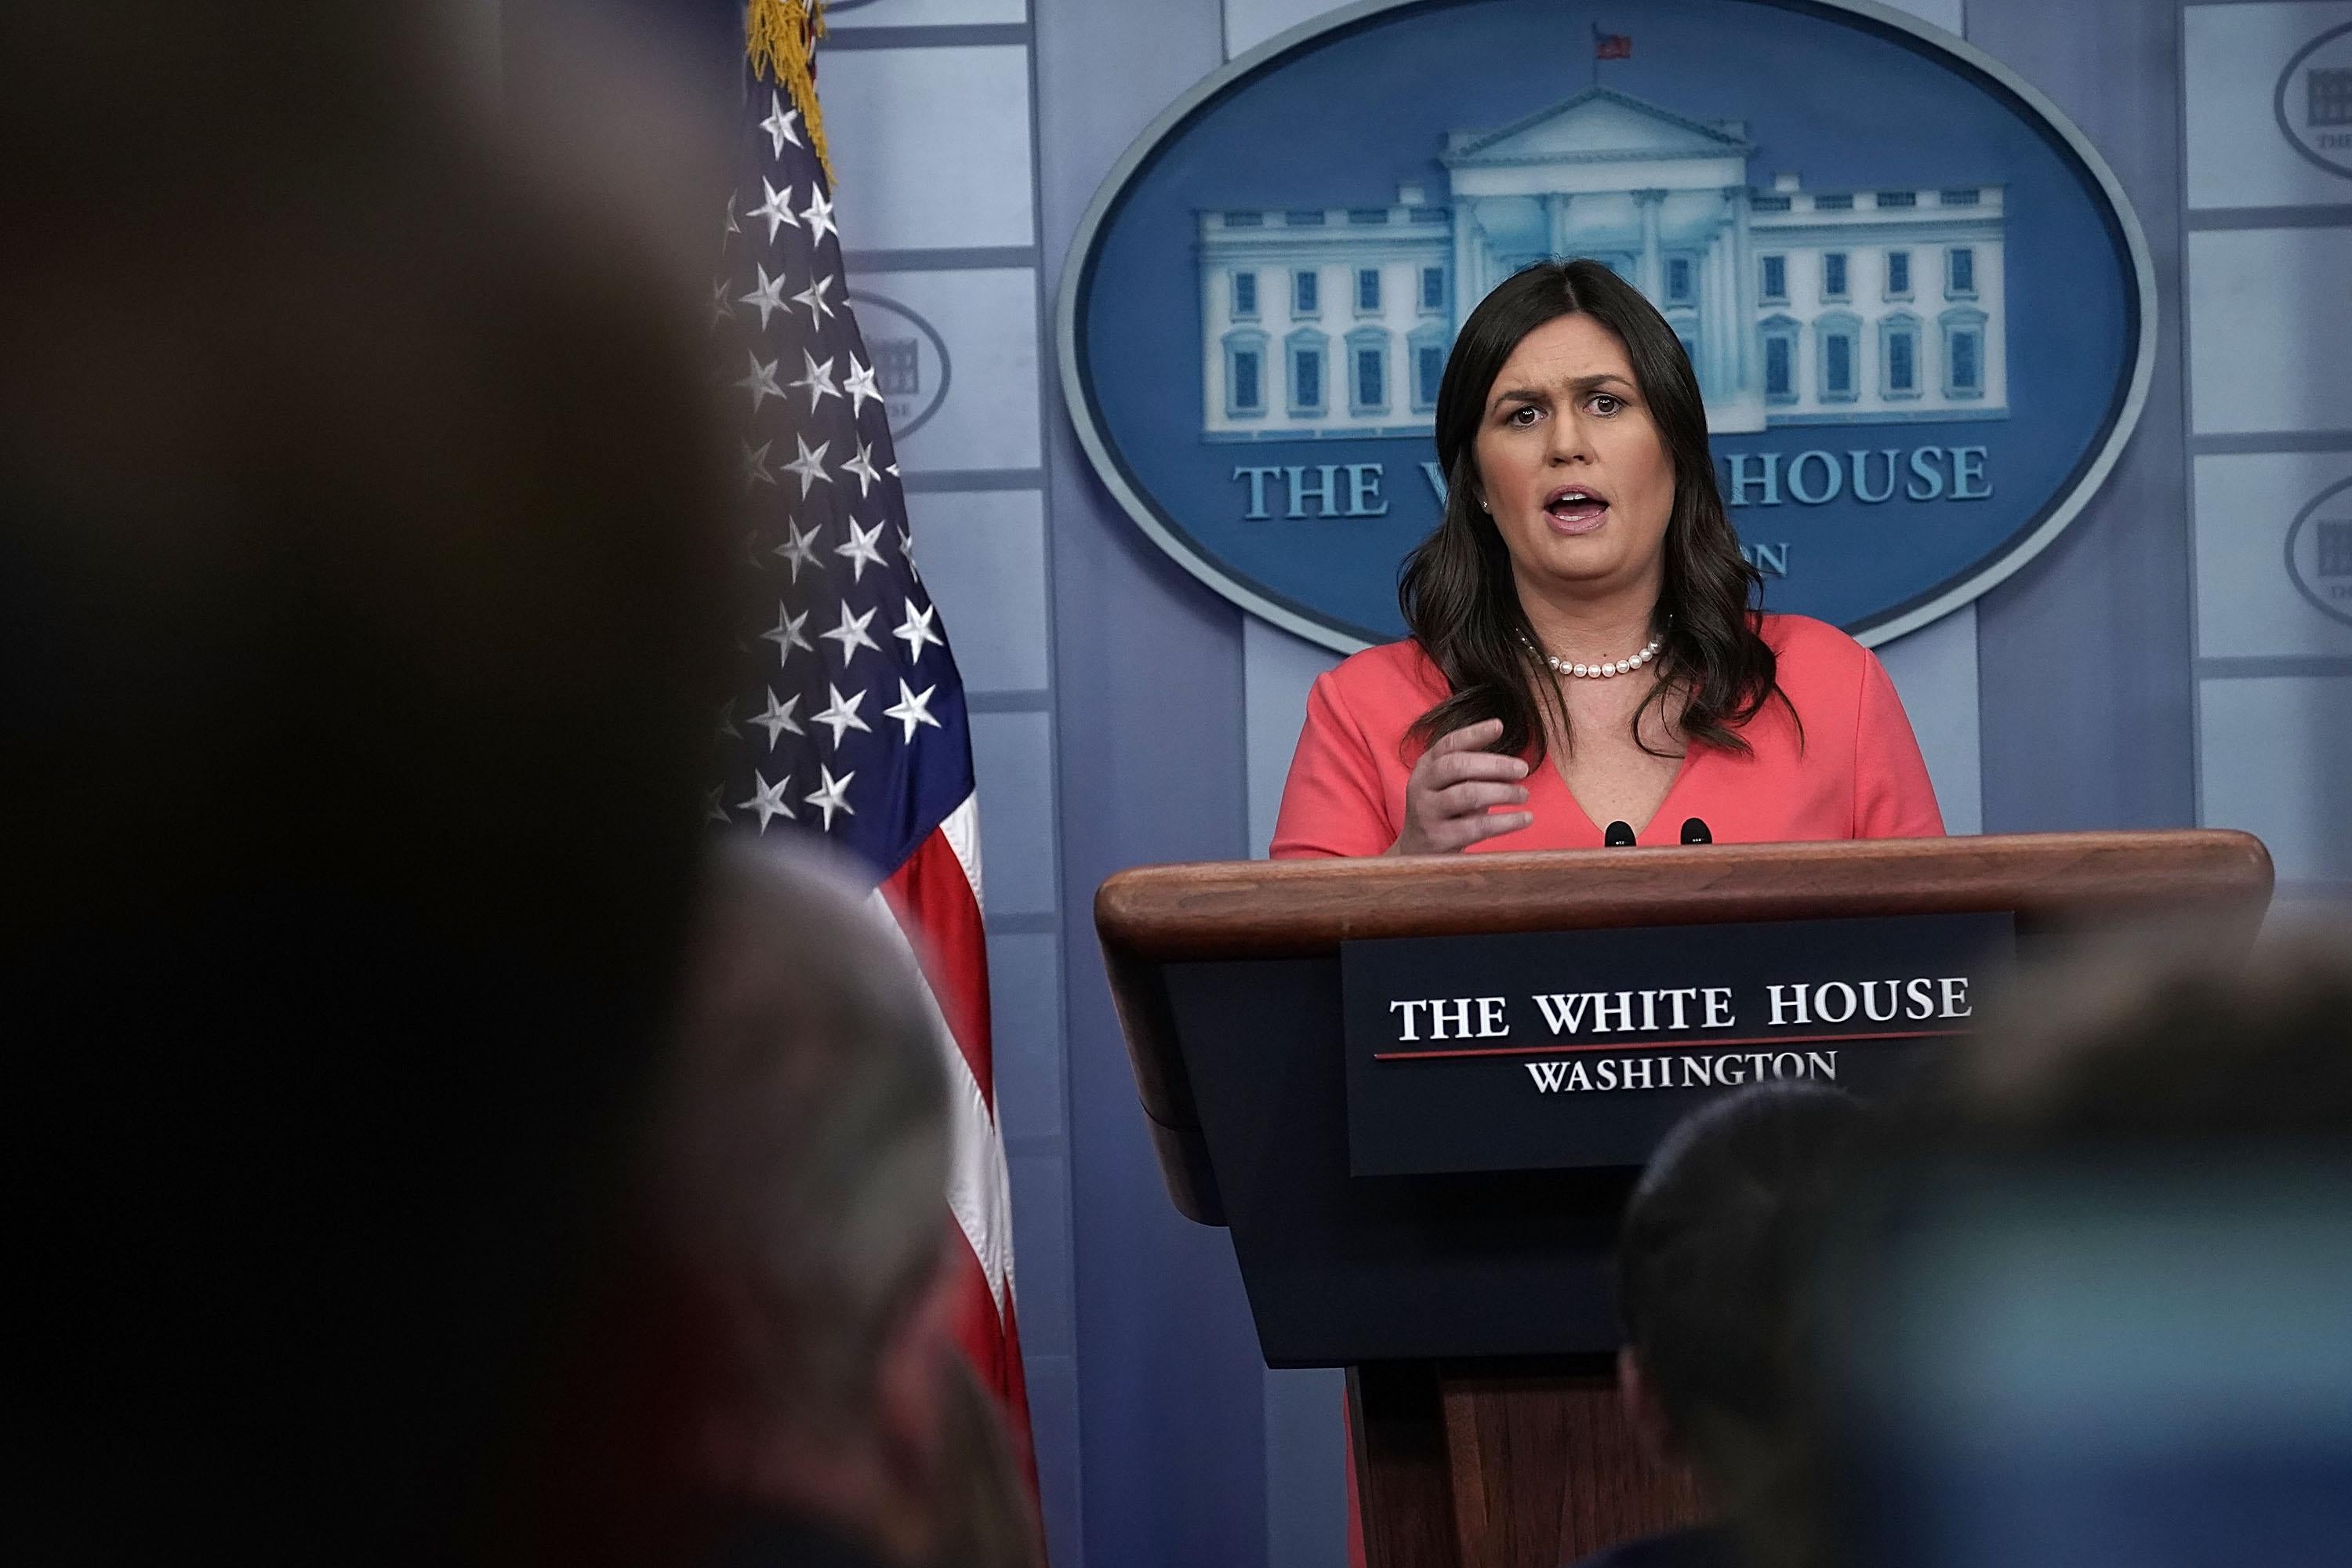 White House Press Secretary Sarah Sanders claimed that the Red Hen restaurant in Lexington refused to serve her. 